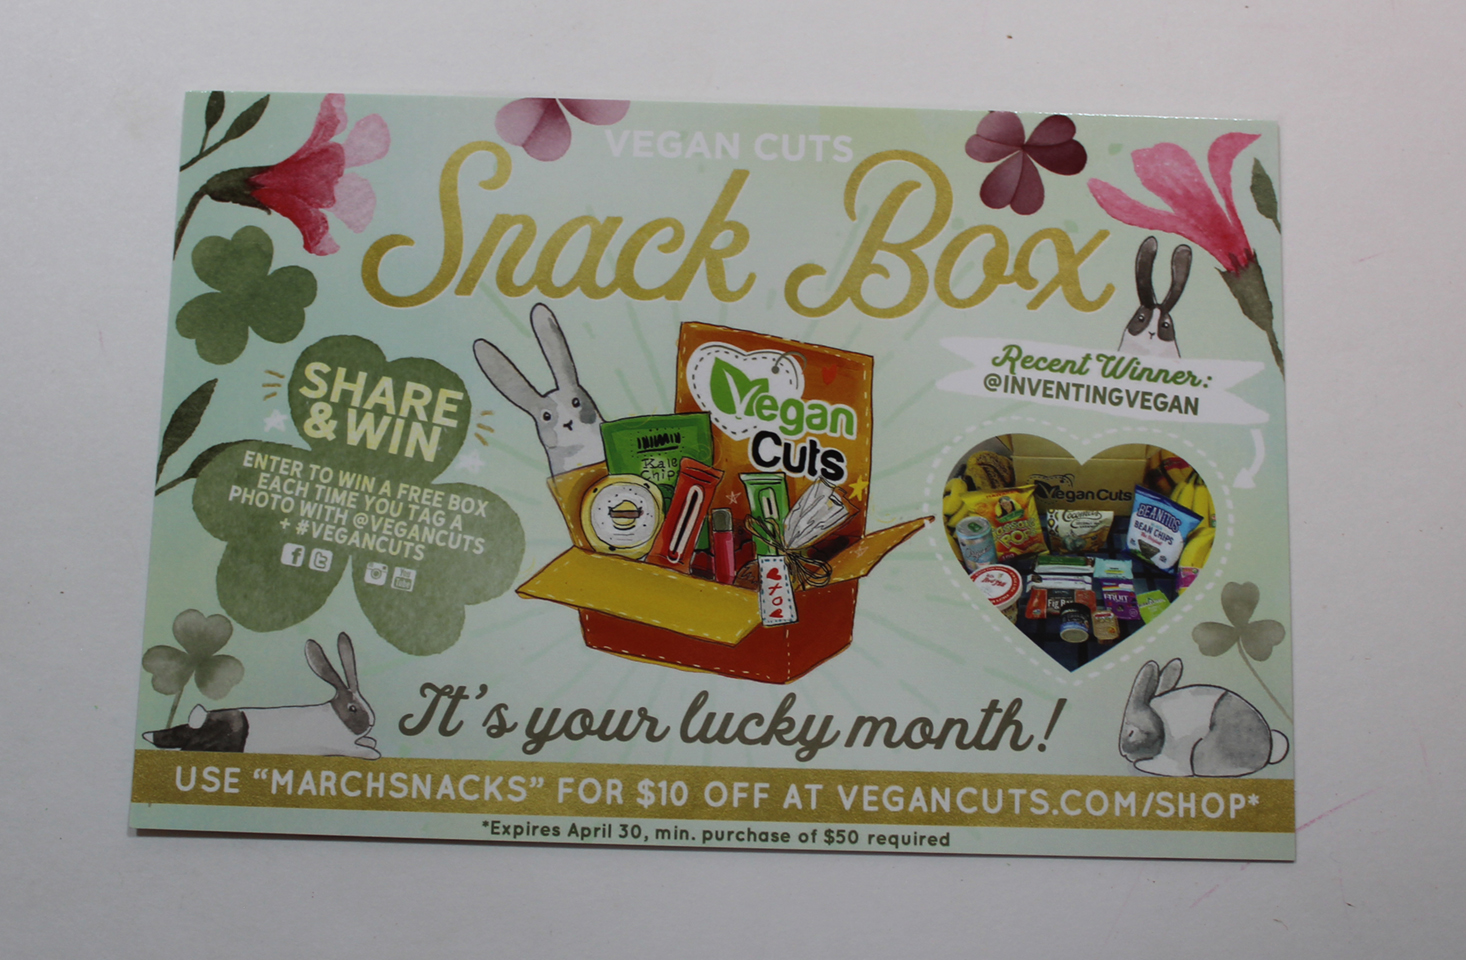 vegan-cuts-snack-march-2017-booklet-front